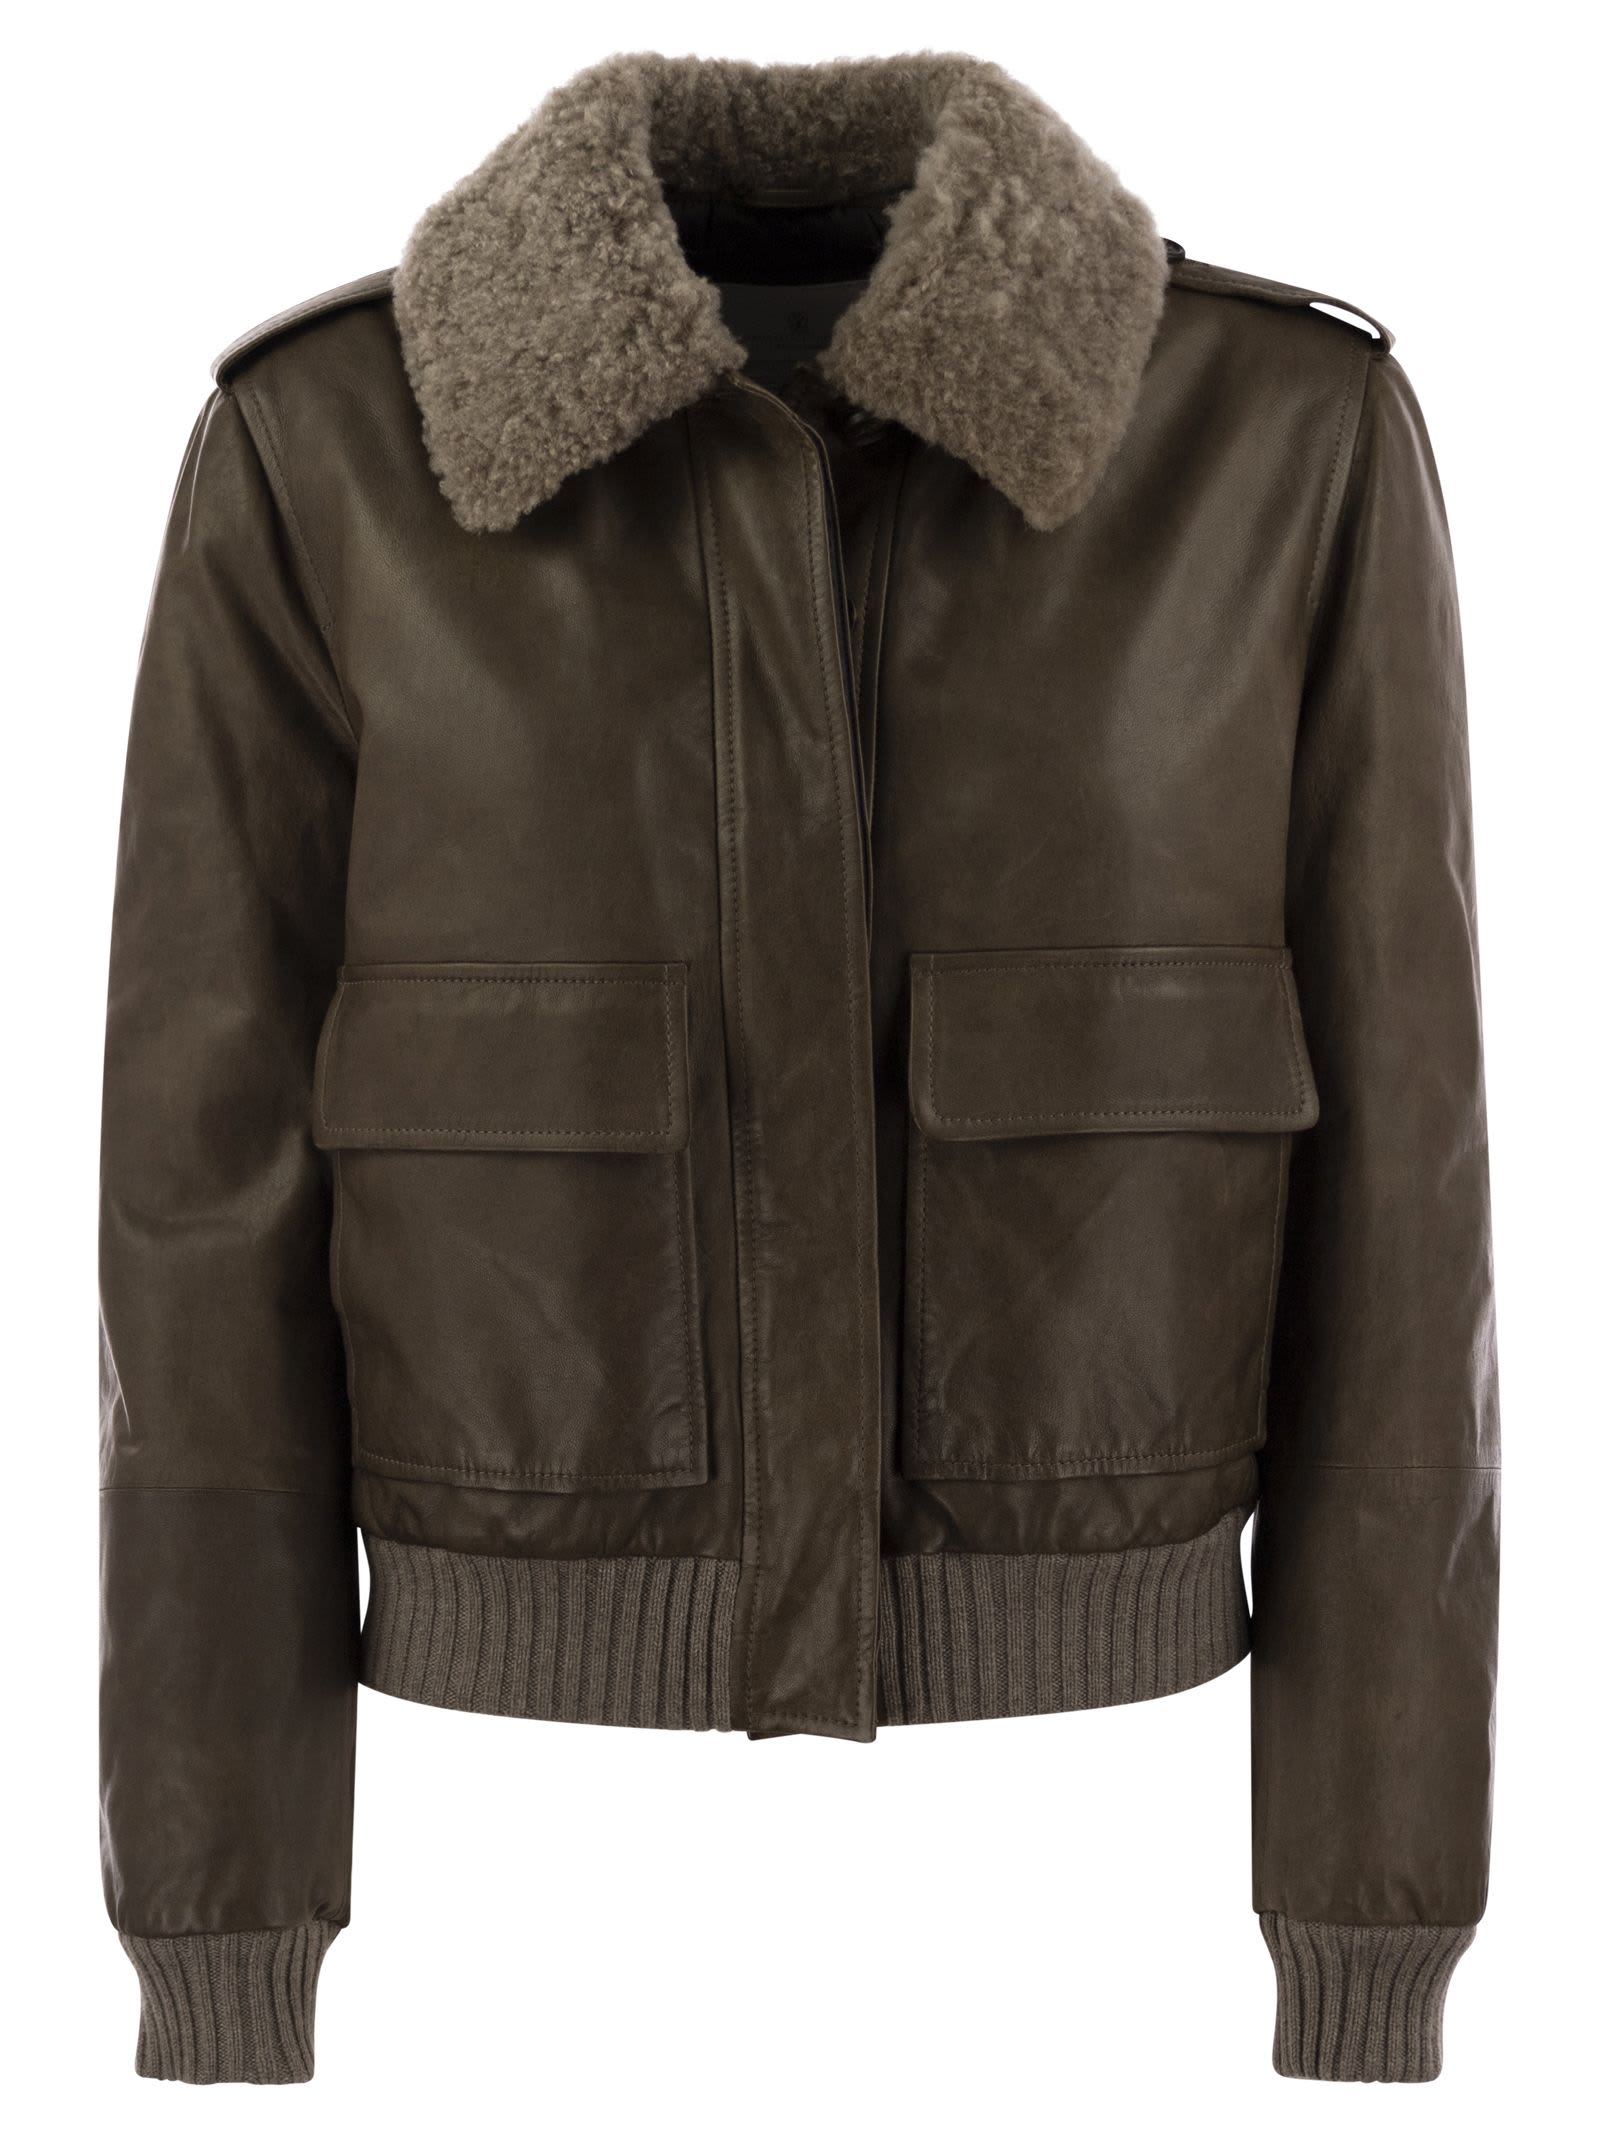 Leather Bomber Jacket And Shearling Collar